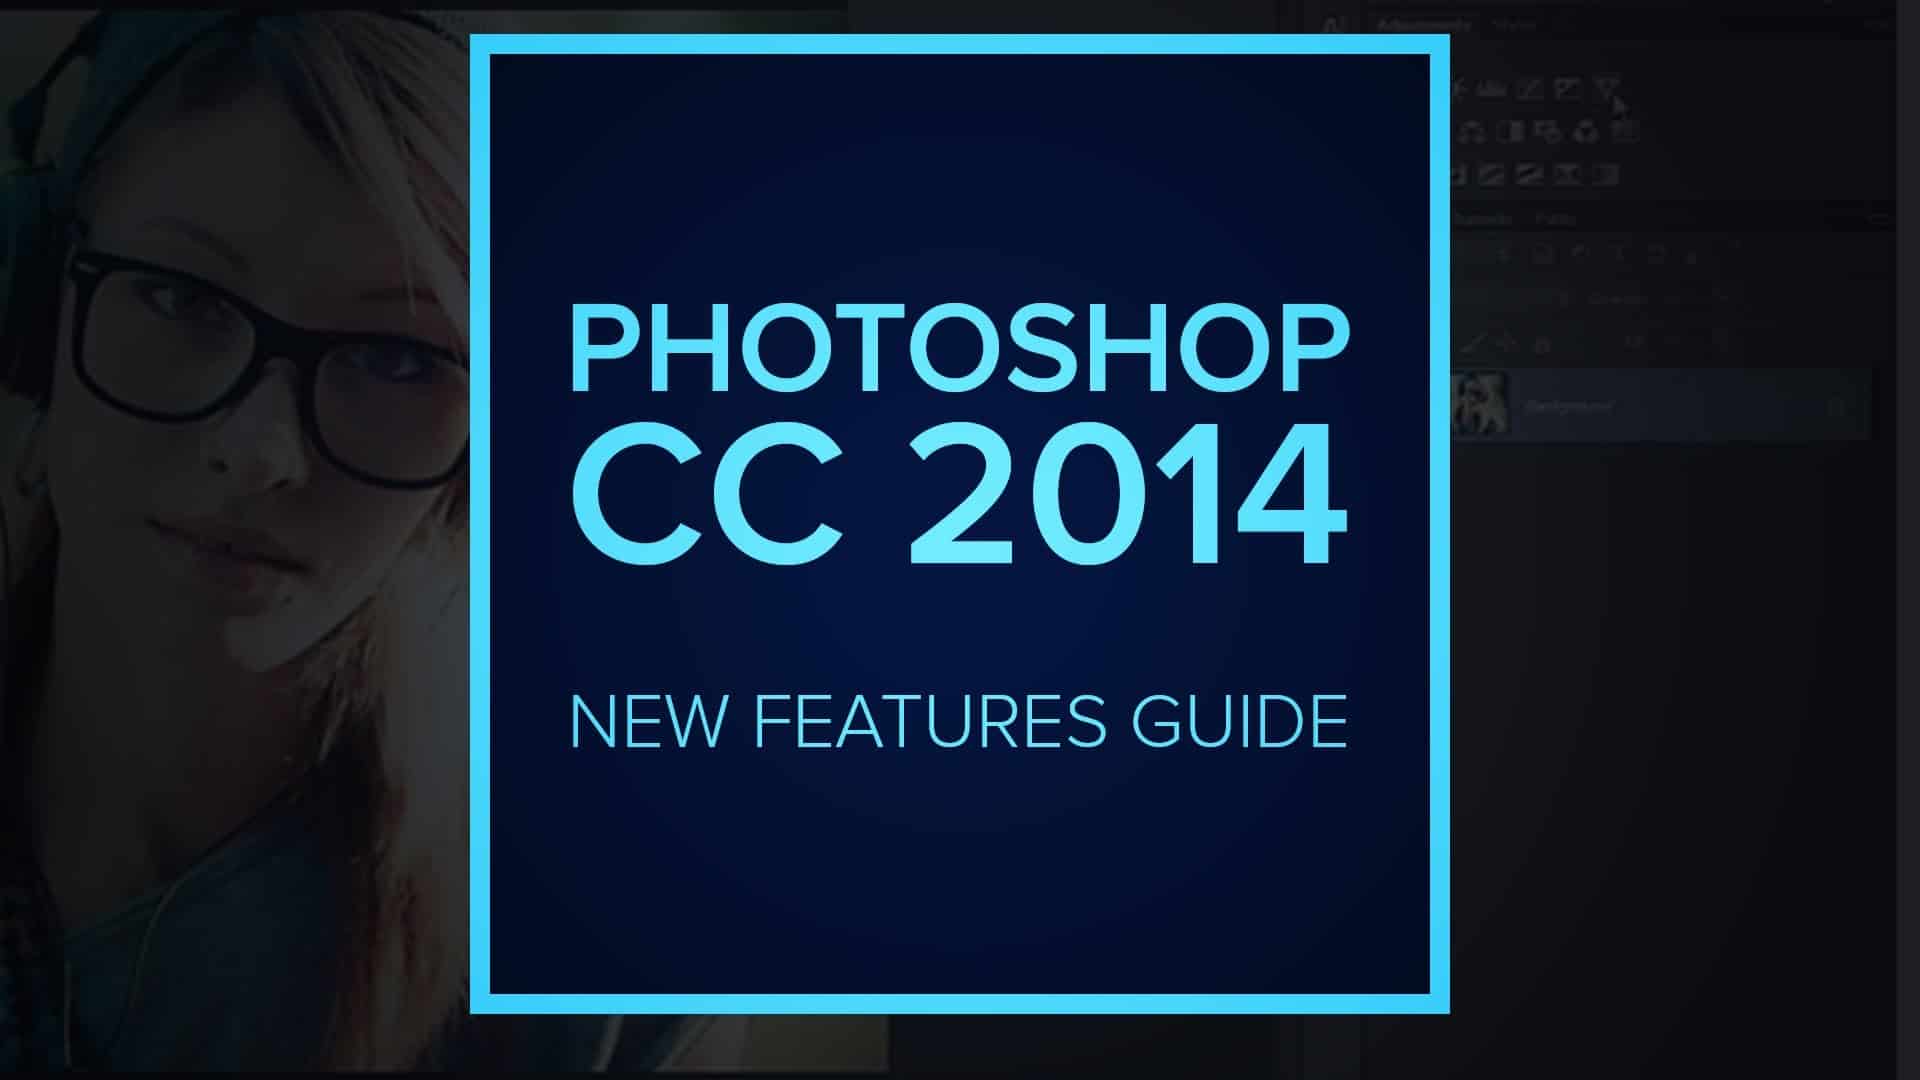 What's New in Photoshop CC 2014? New Features Guide